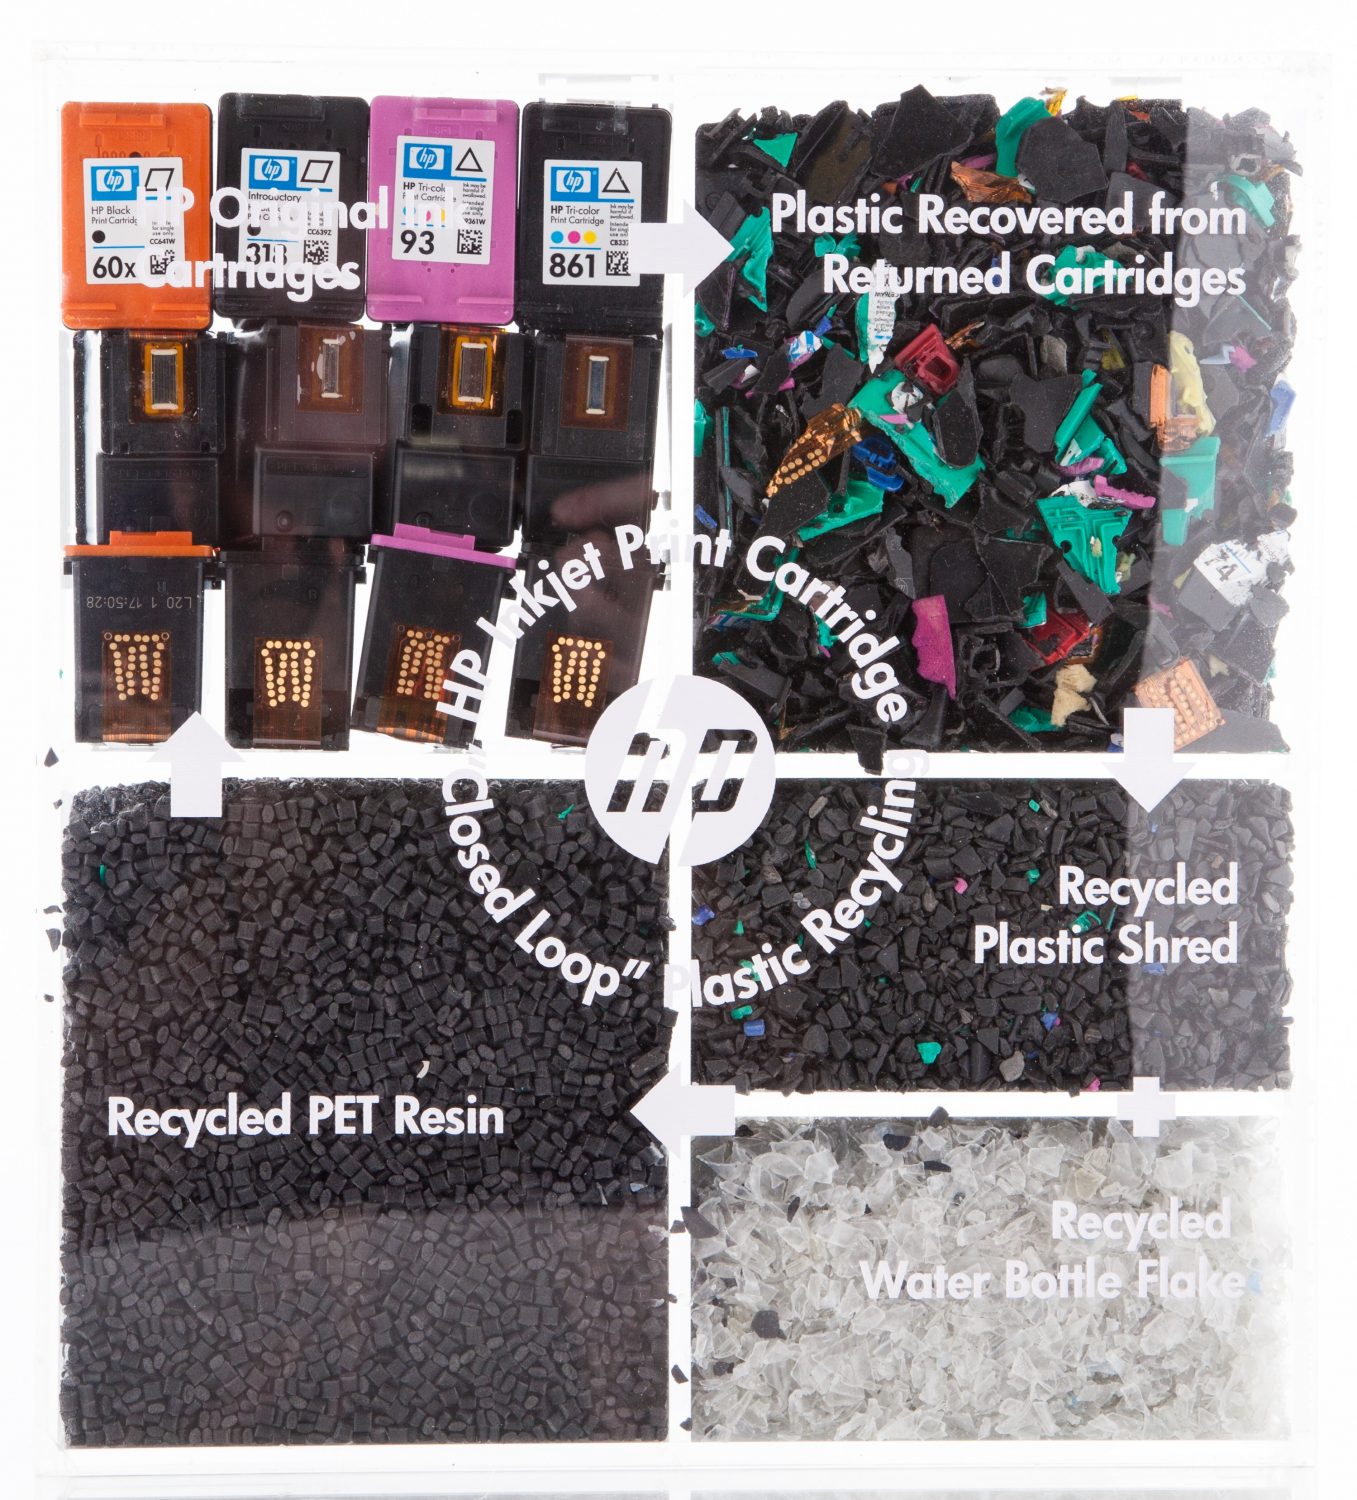 Plastic display showcasing the closed loop recycling process for HP's Inkjet Print Cartridges.